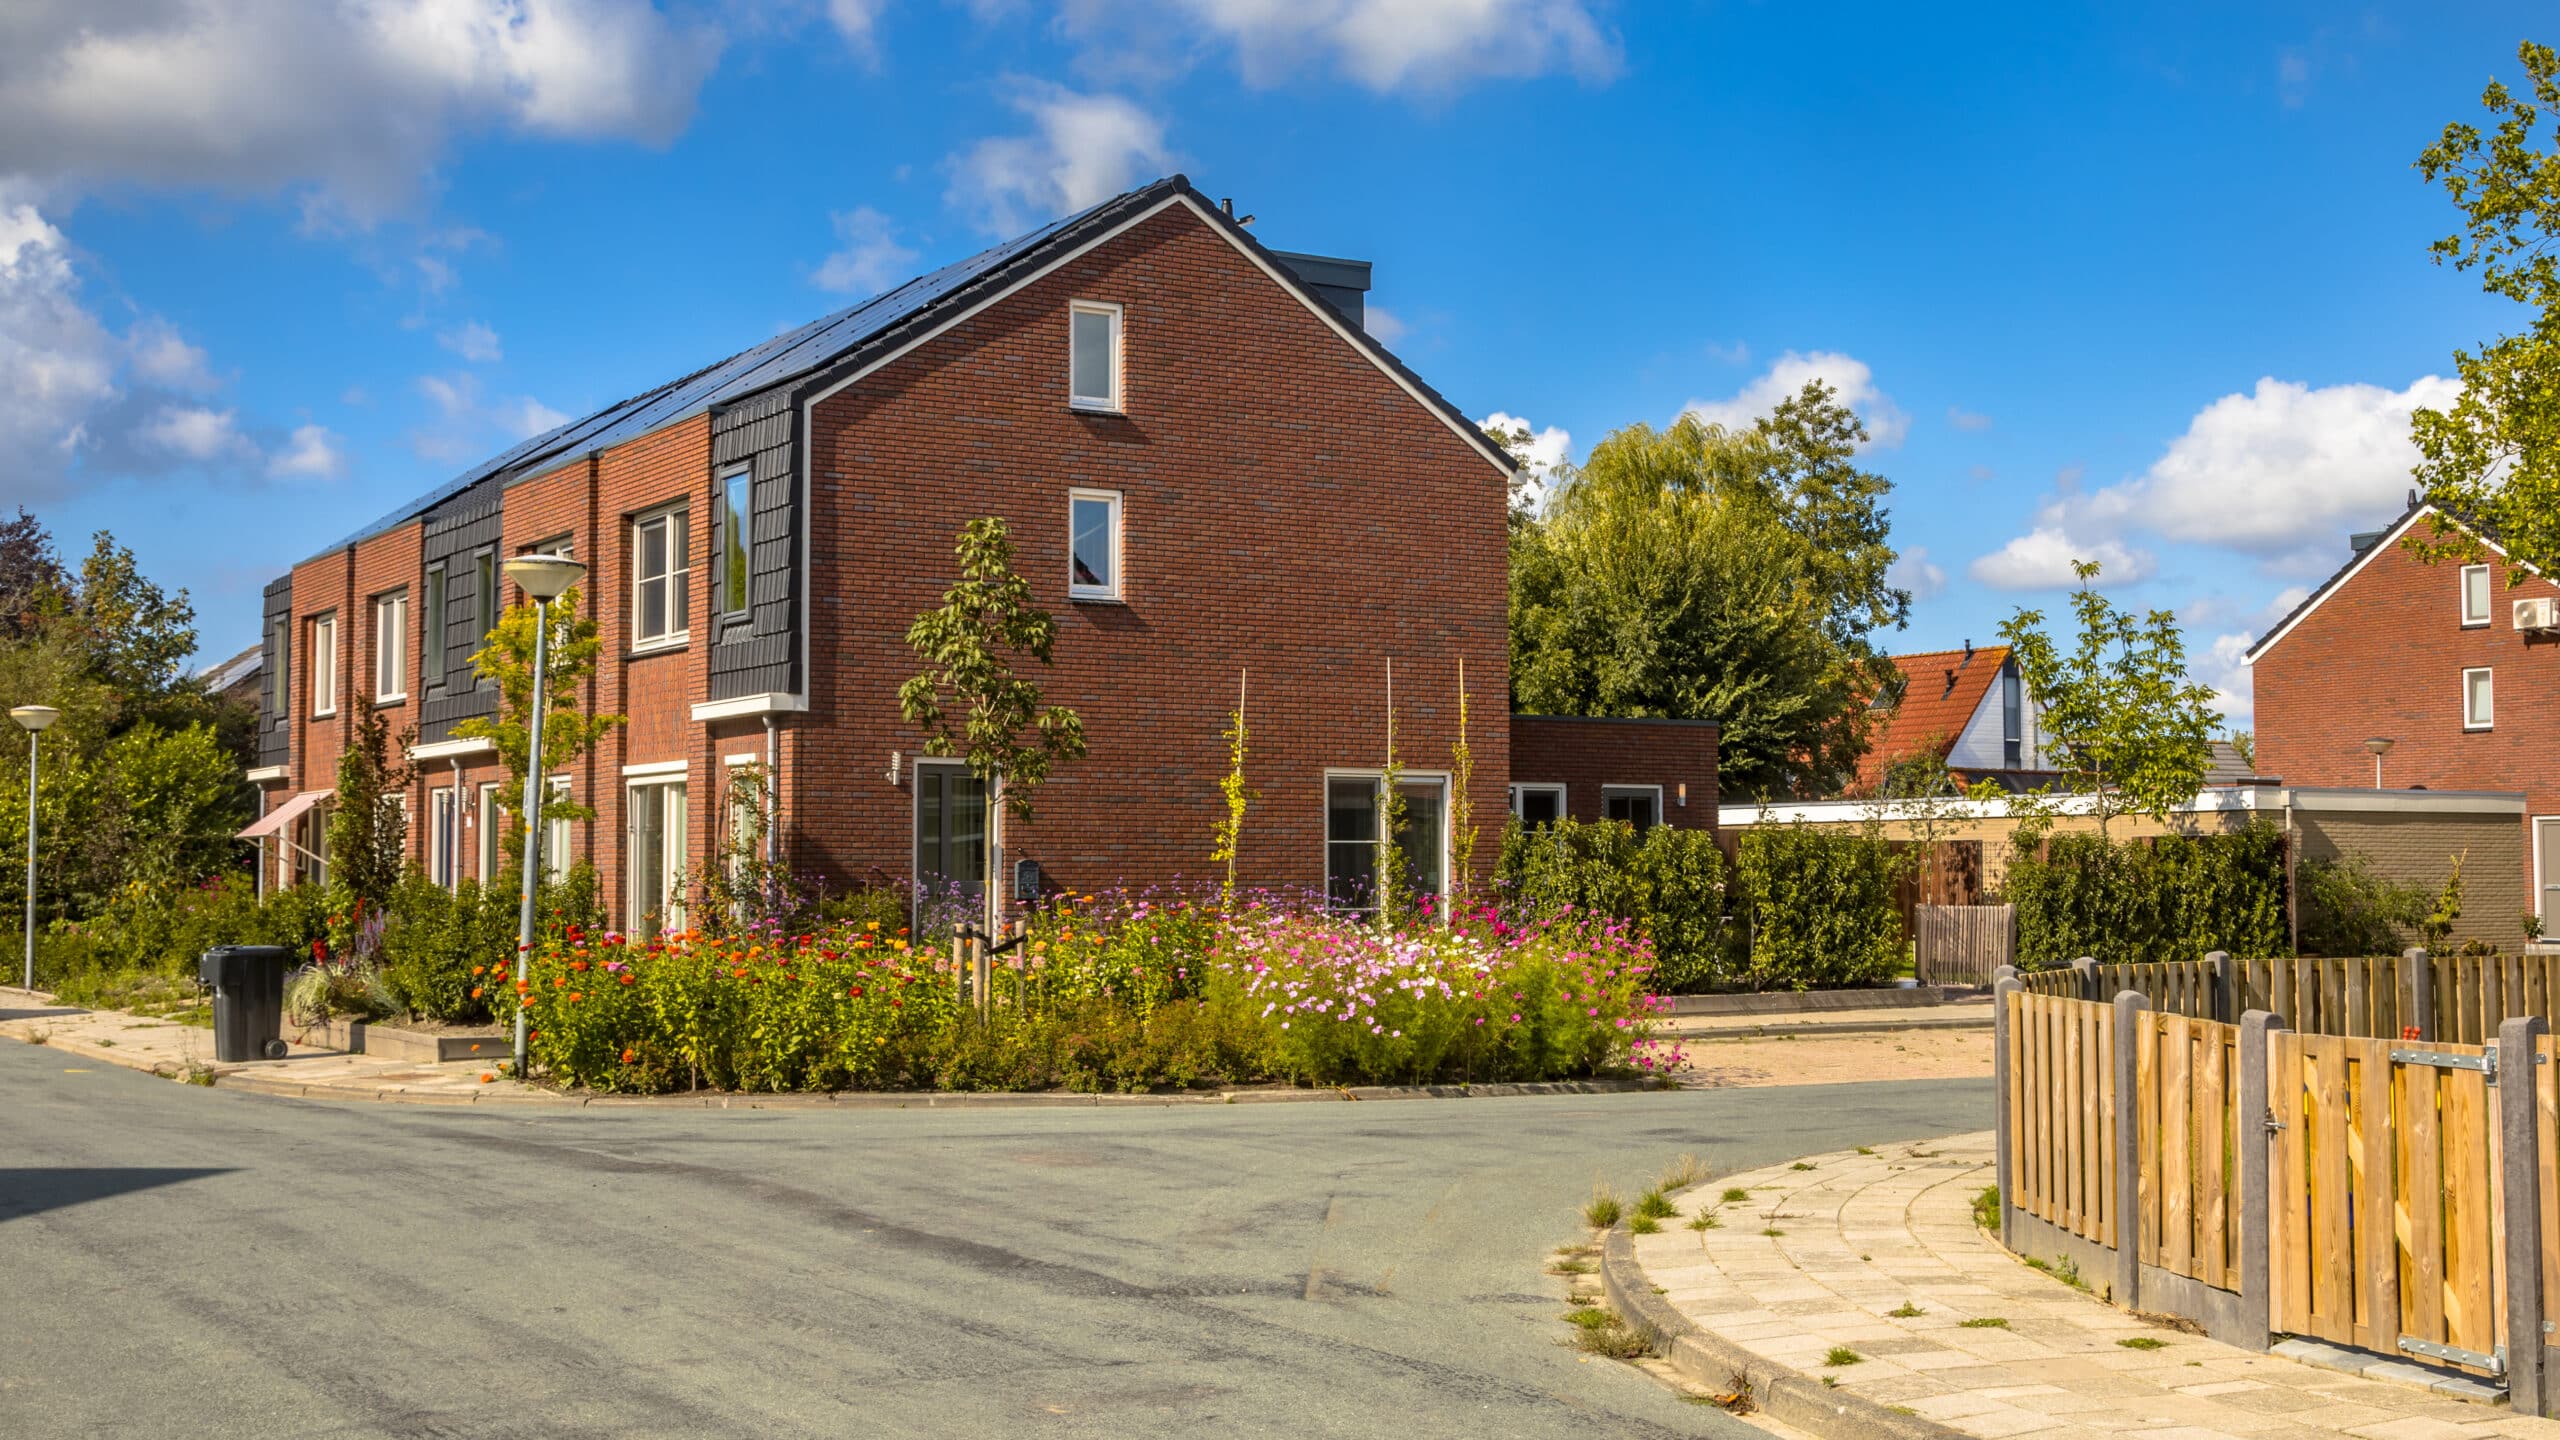 Street landscape with modern houses and flowers in a dutch town, The Netherlands